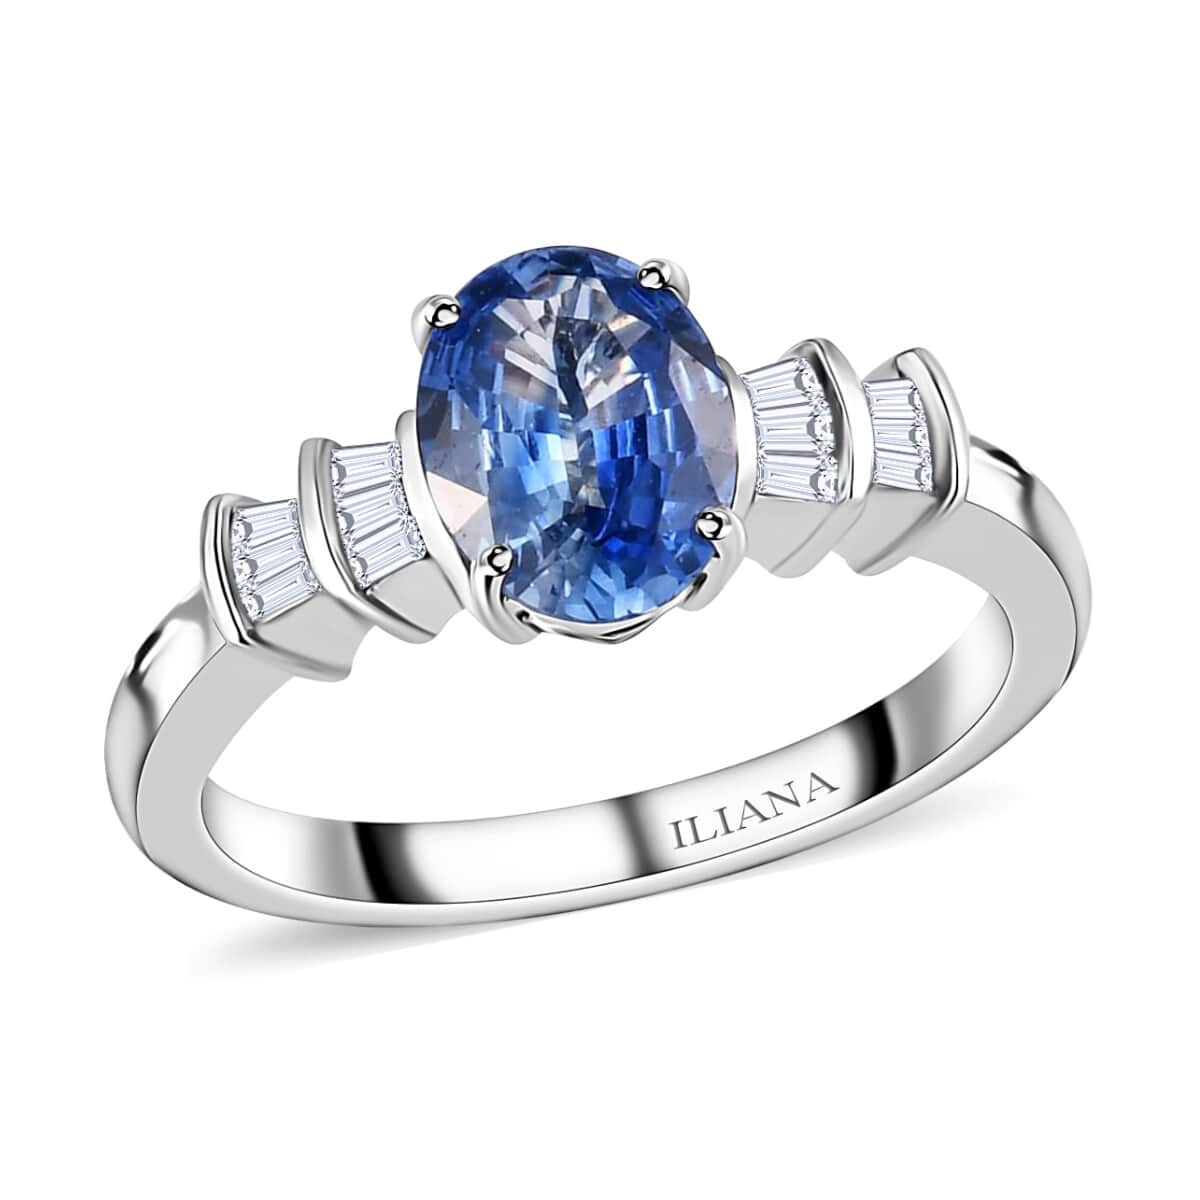 Iliana 18K White Gold AAA Royal Ceylon Sapphire and G-H SI Diamond Ring 3.60 Grams 1.40 ctw 2.5 star rating 2 Reviews |  image number 0